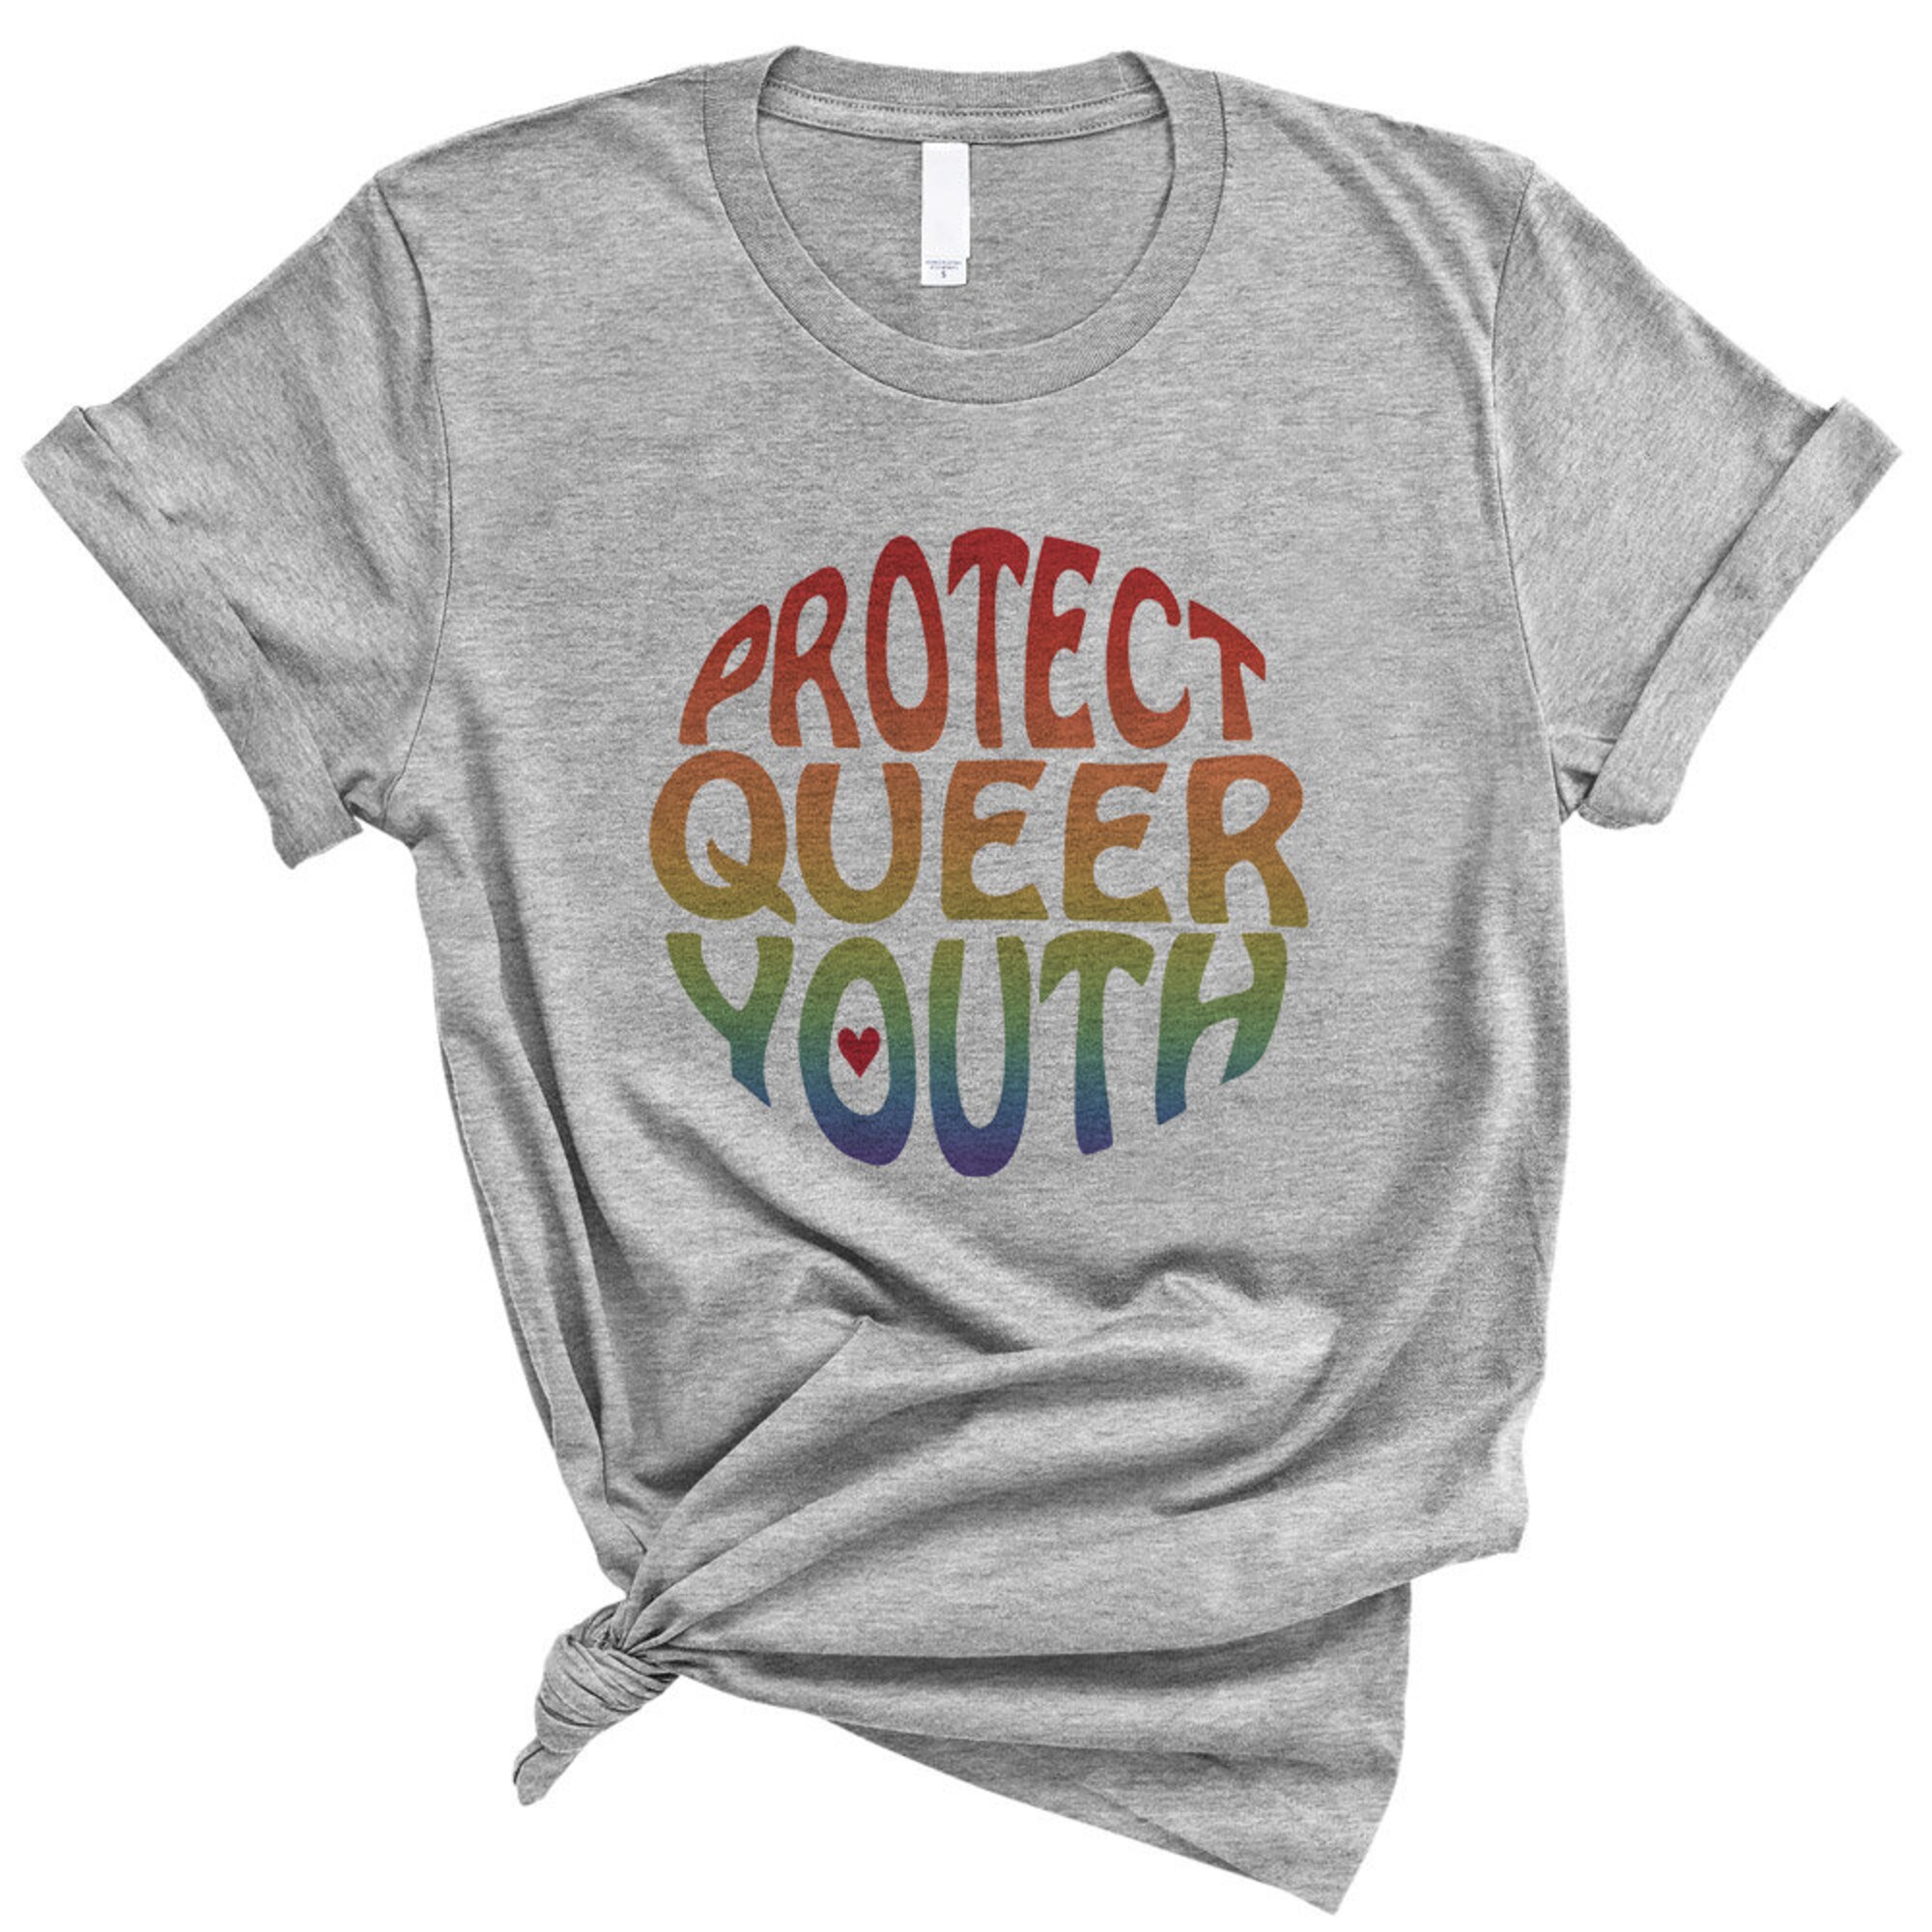 Protect Queer Youth Next Level T-Shirt